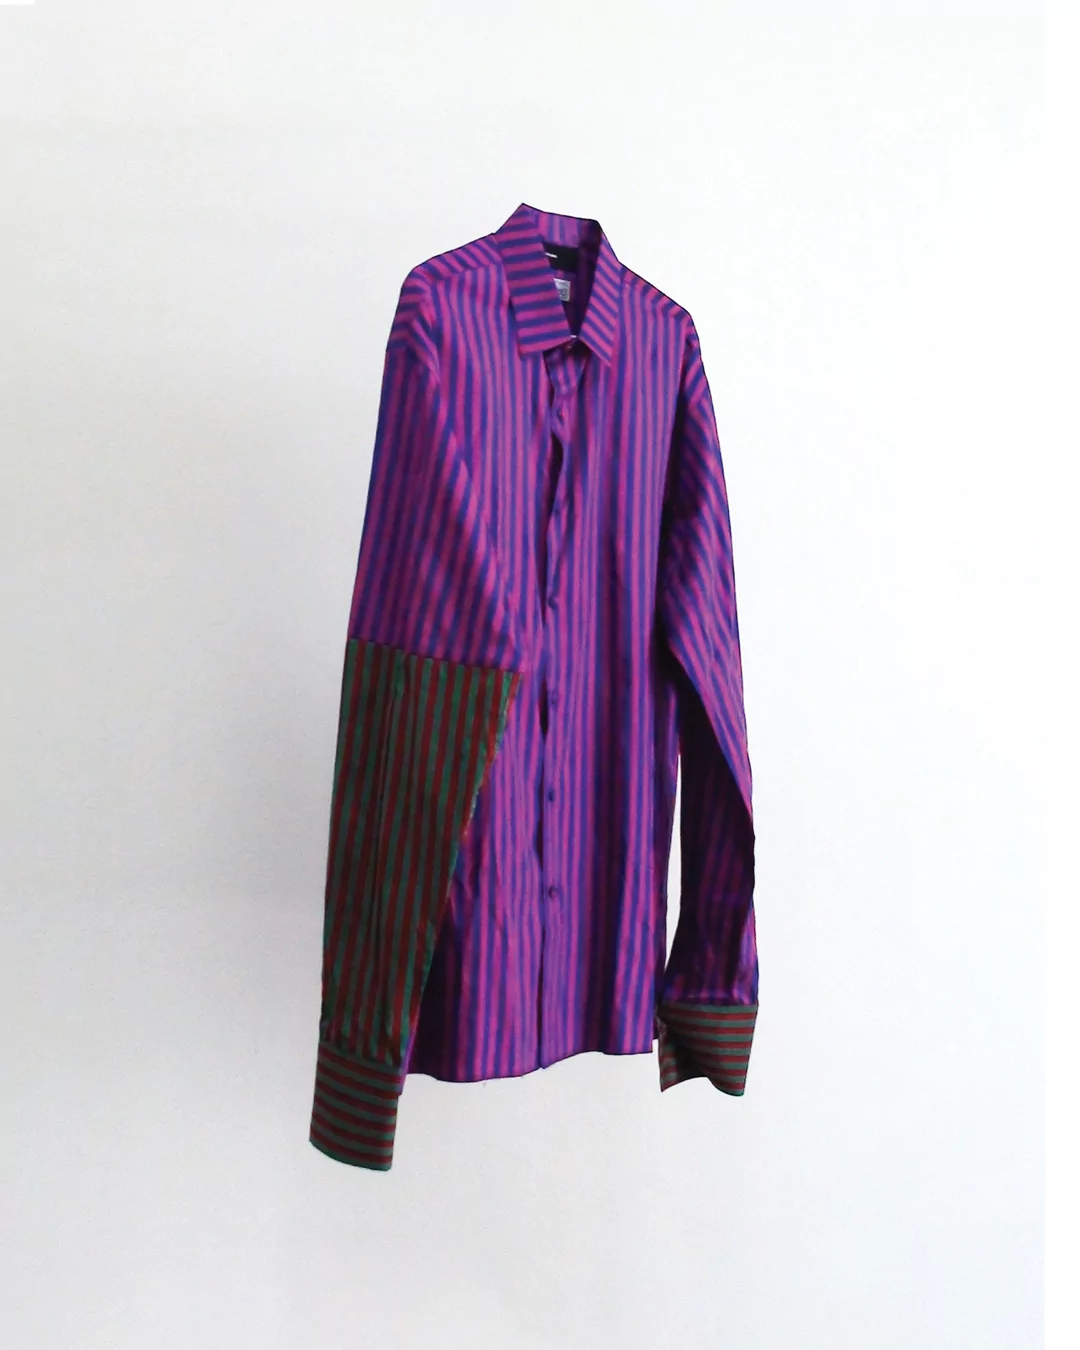 Woven from Thai silk, relaxed fit shirt in striped. With contrasting right sleeve. 

FOR ORDERS OR MORE INFORMATION PLEASE CONTACT ASK@RUKPONG.COM